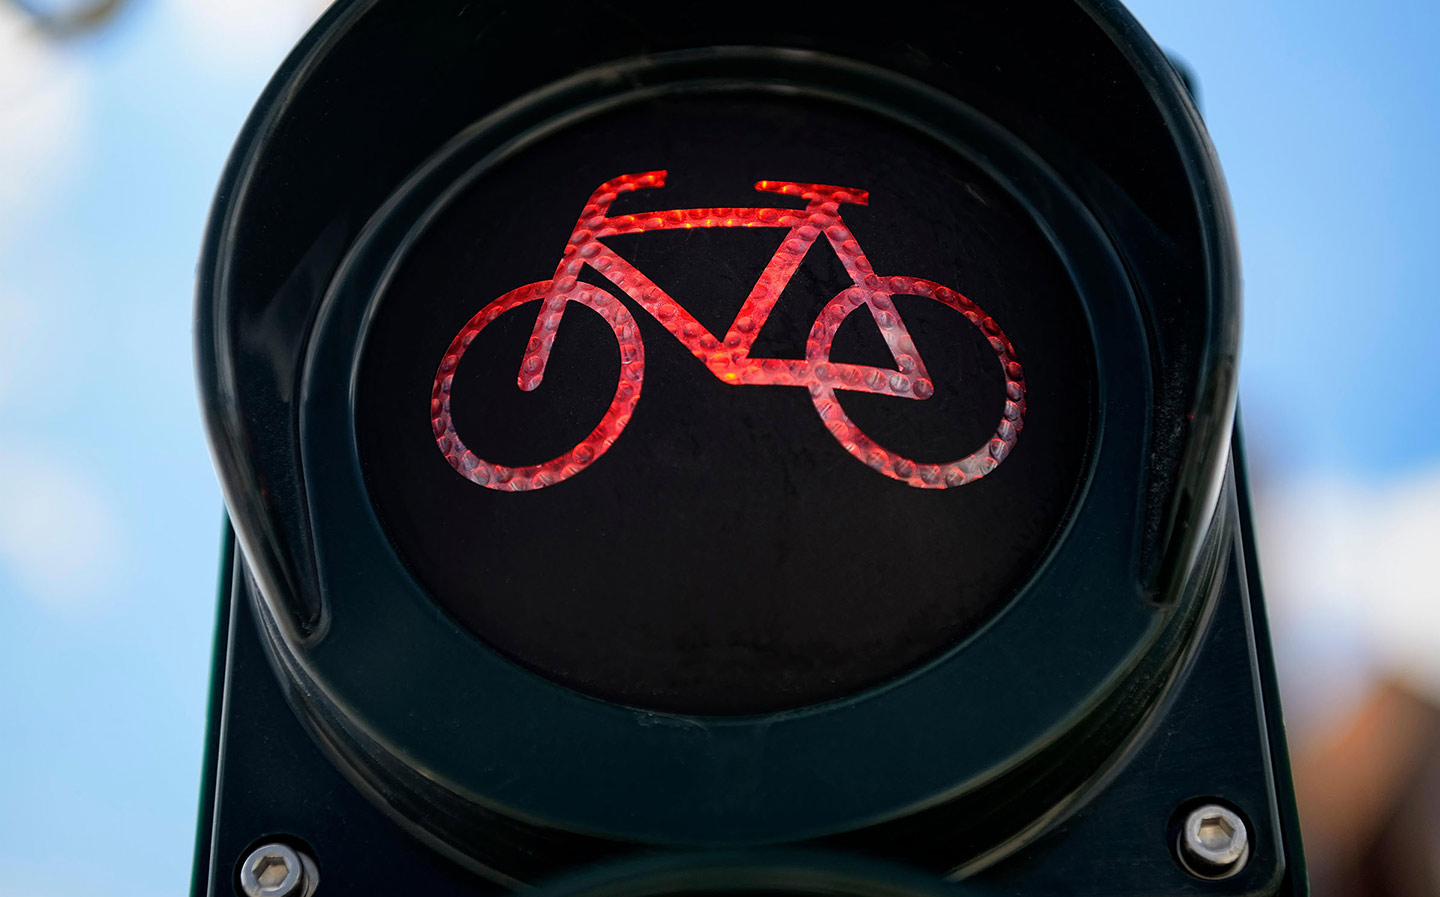 Reader Letters: Criminal cyclists, dazzling brakes, smart motorway signs and more "Polite" notices